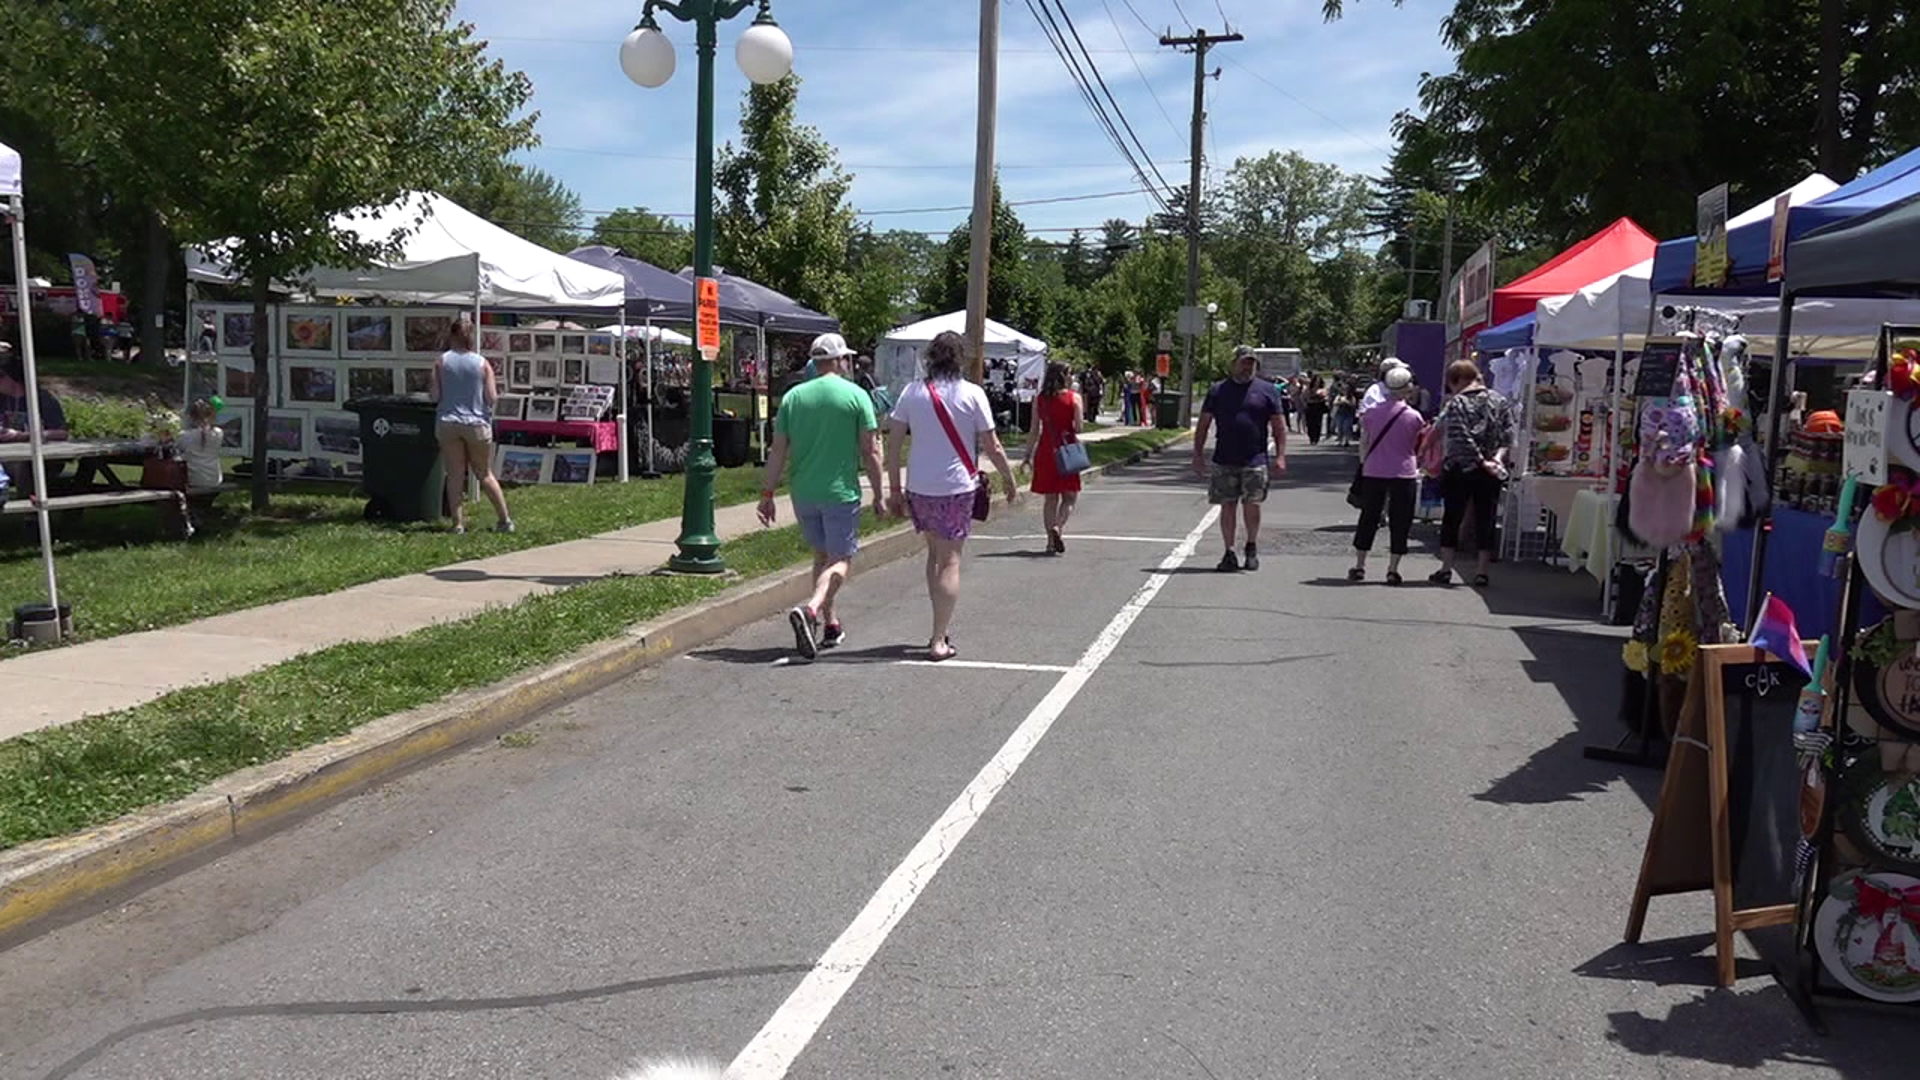 To kick off Pride Month, Lewisburg held its 3rd Annual Snyder-Union-Northumberland County PrideFest.